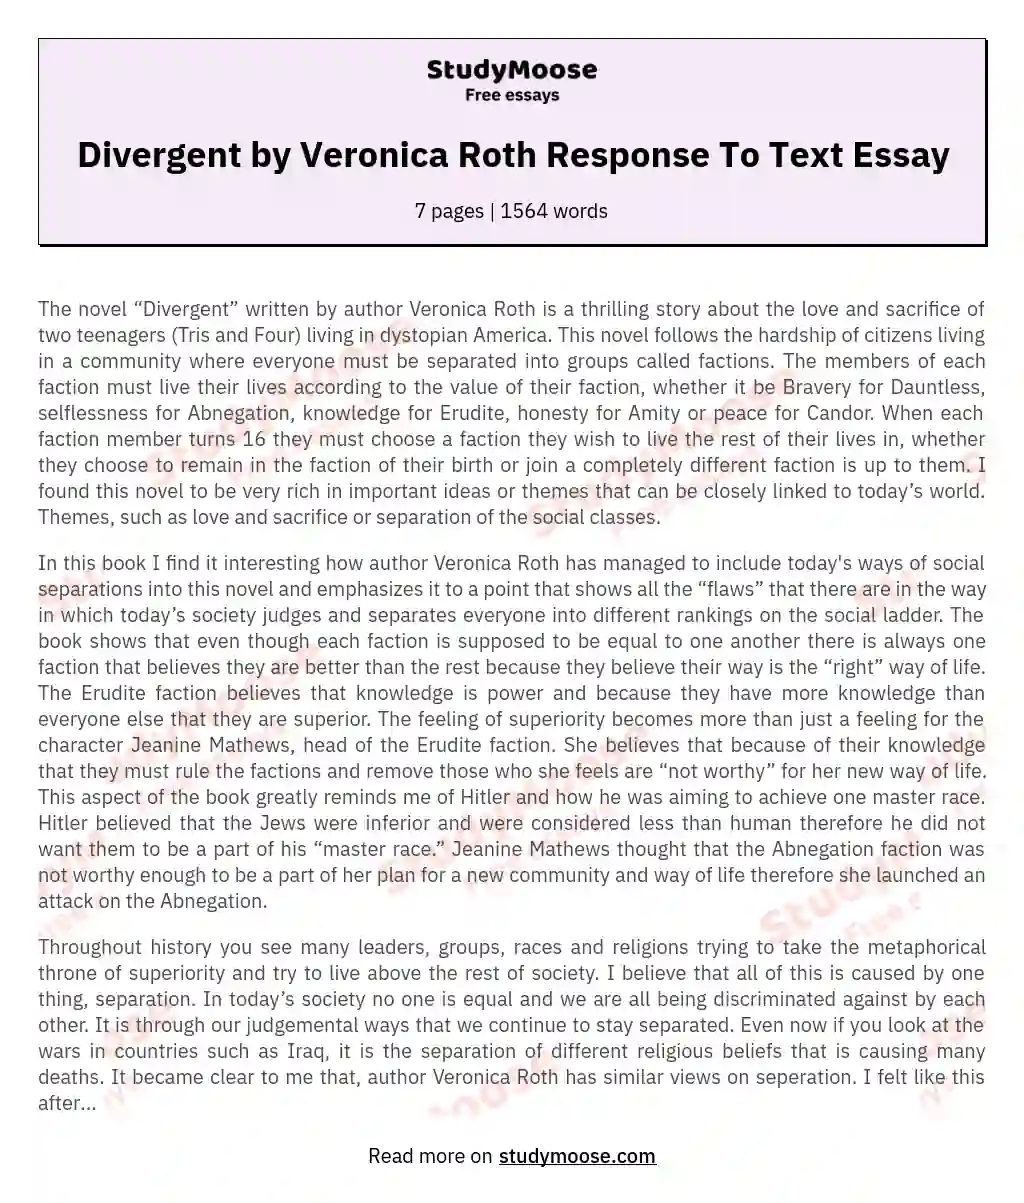 Divergent by Veronica Roth Response To Text Essay